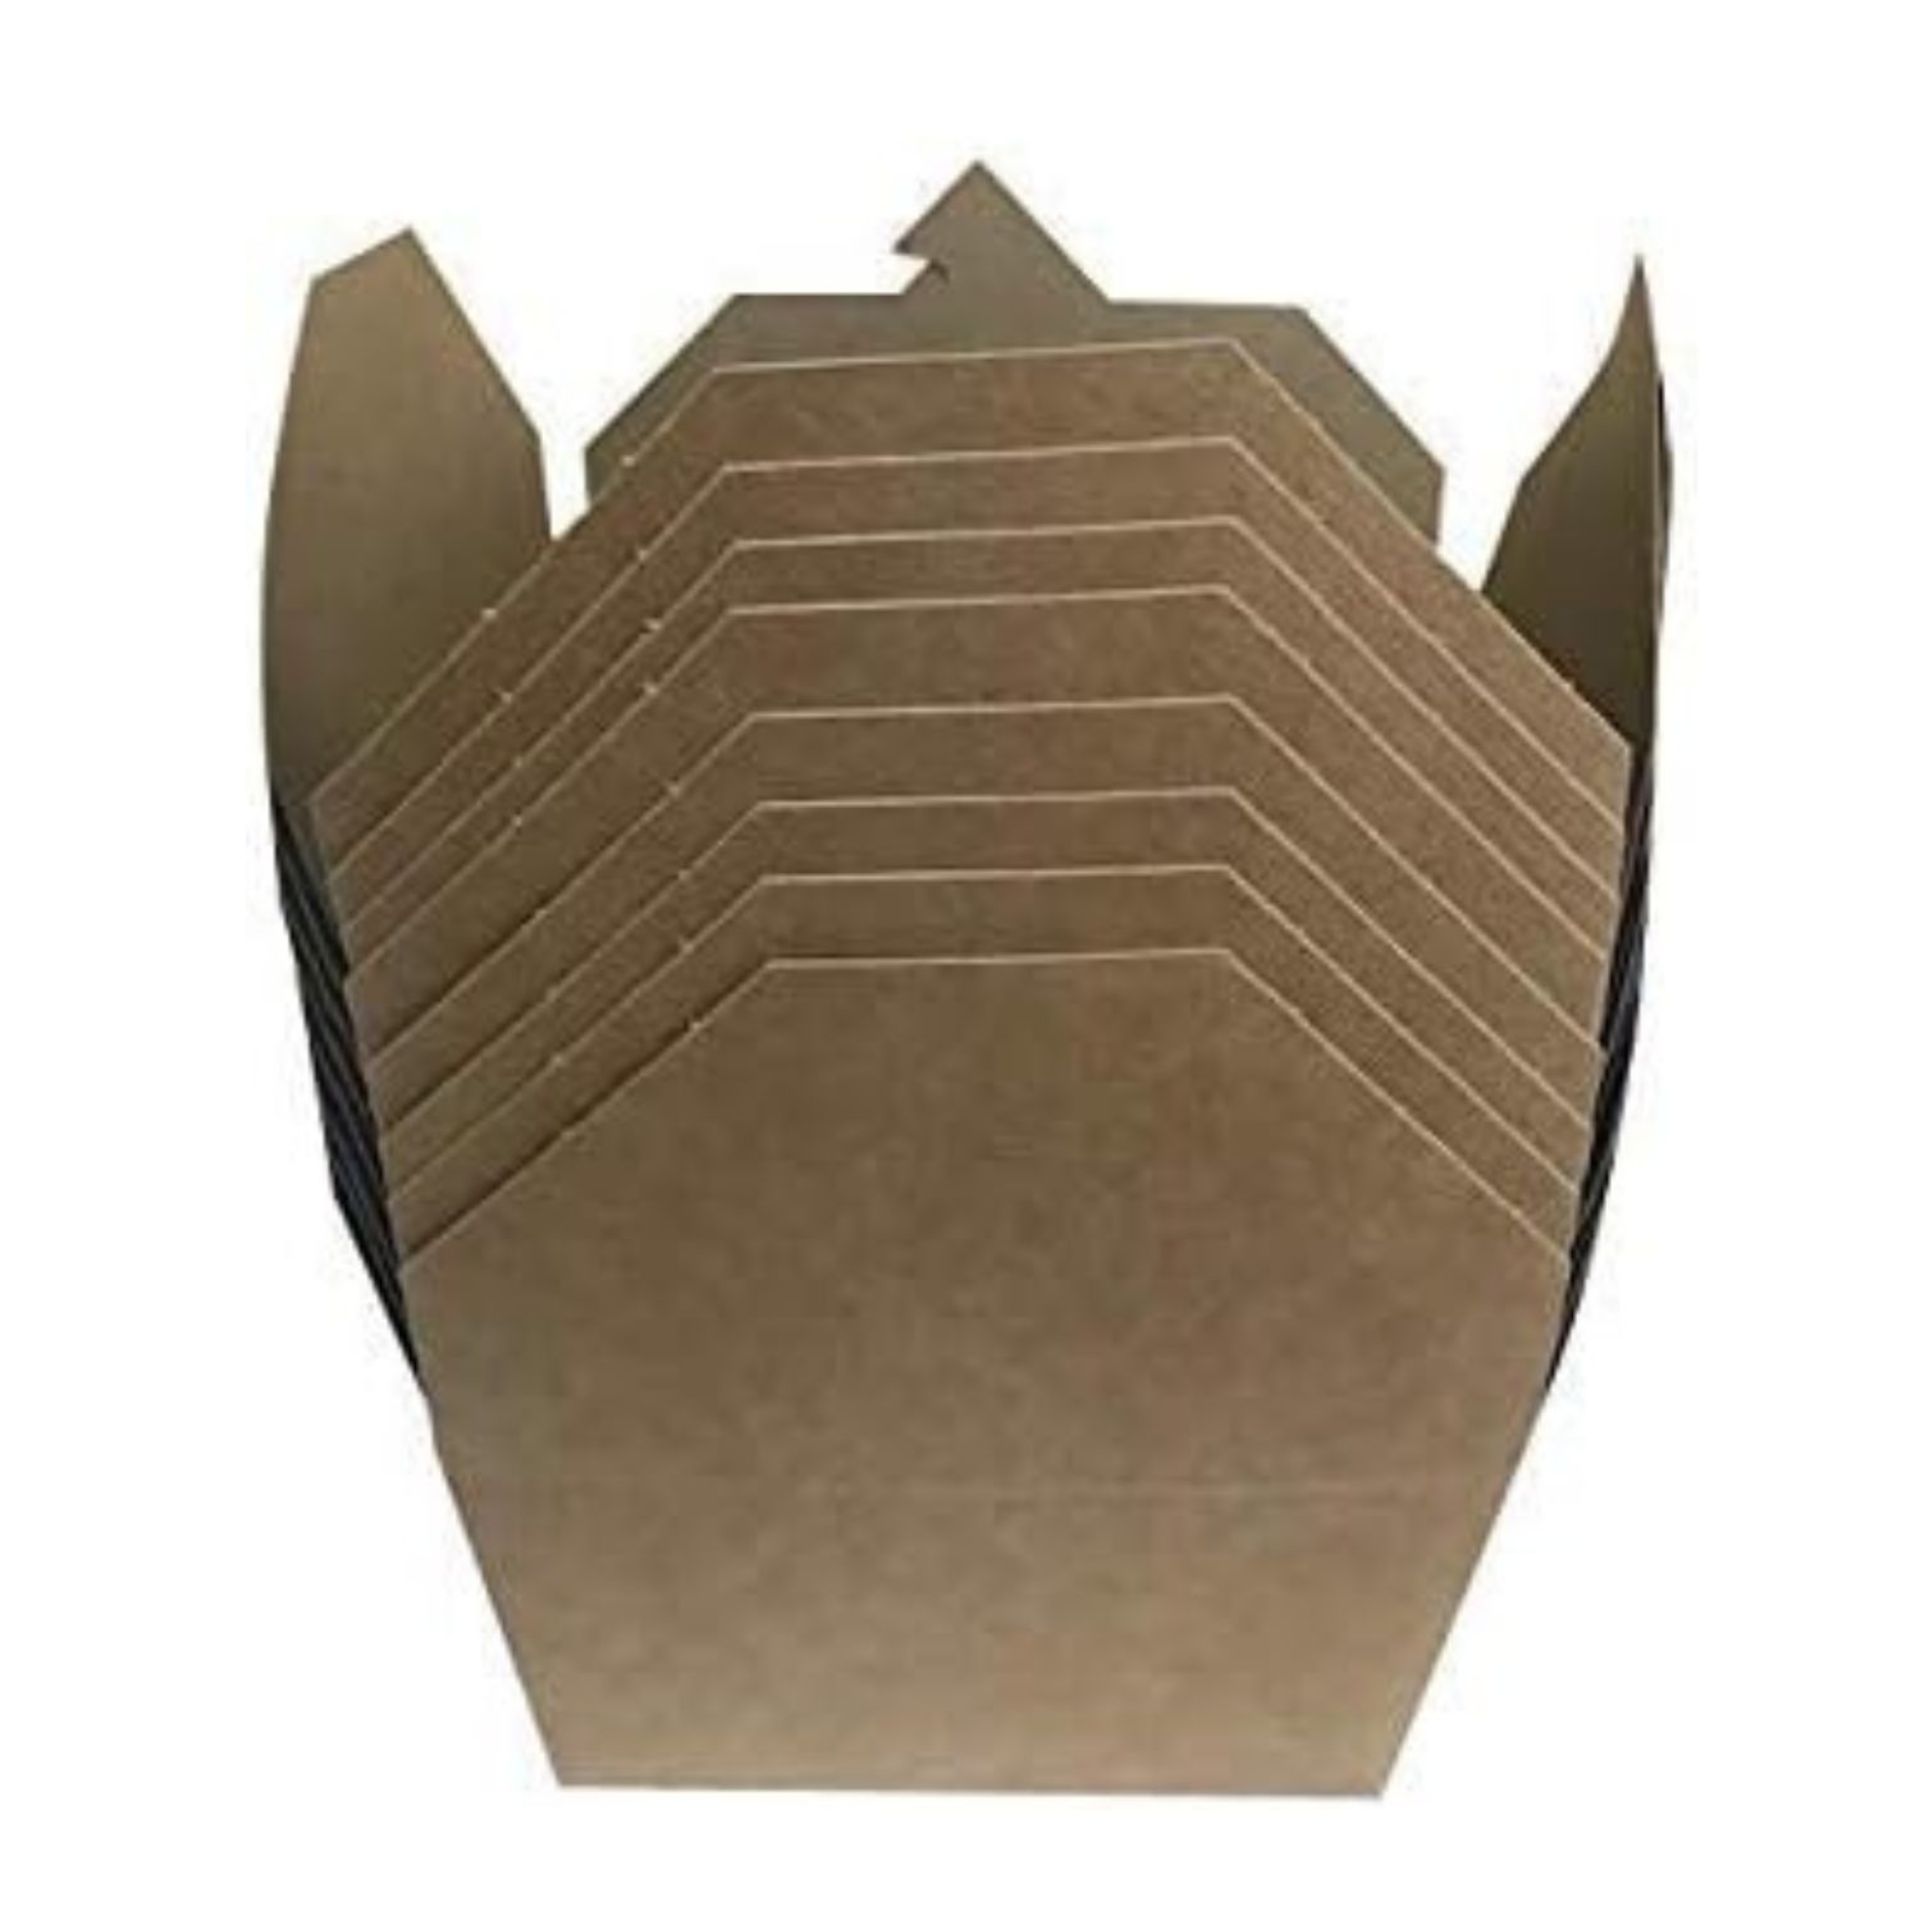 FOOD TAKEAWAY BOXES, DISPOSABLE KRAFT BOXES, PACK OF 40 - Image 2 of 4